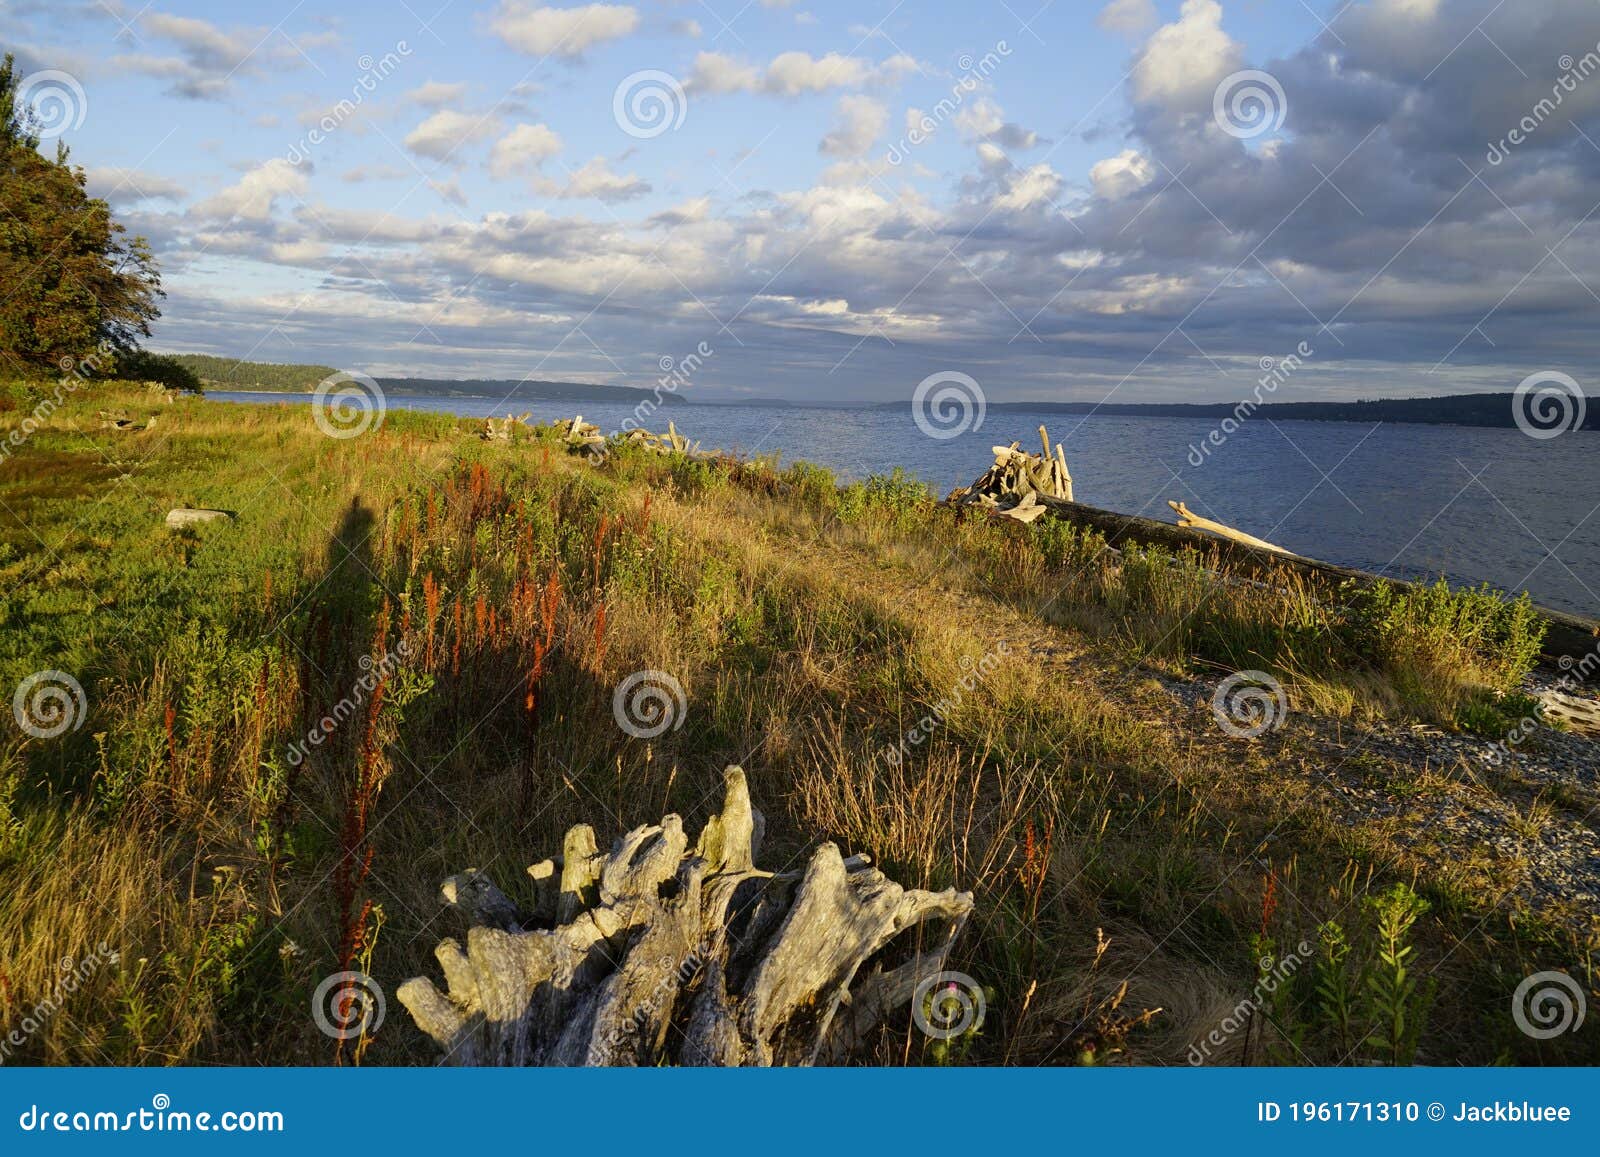 fort ebey state park whidbey island washington seattle